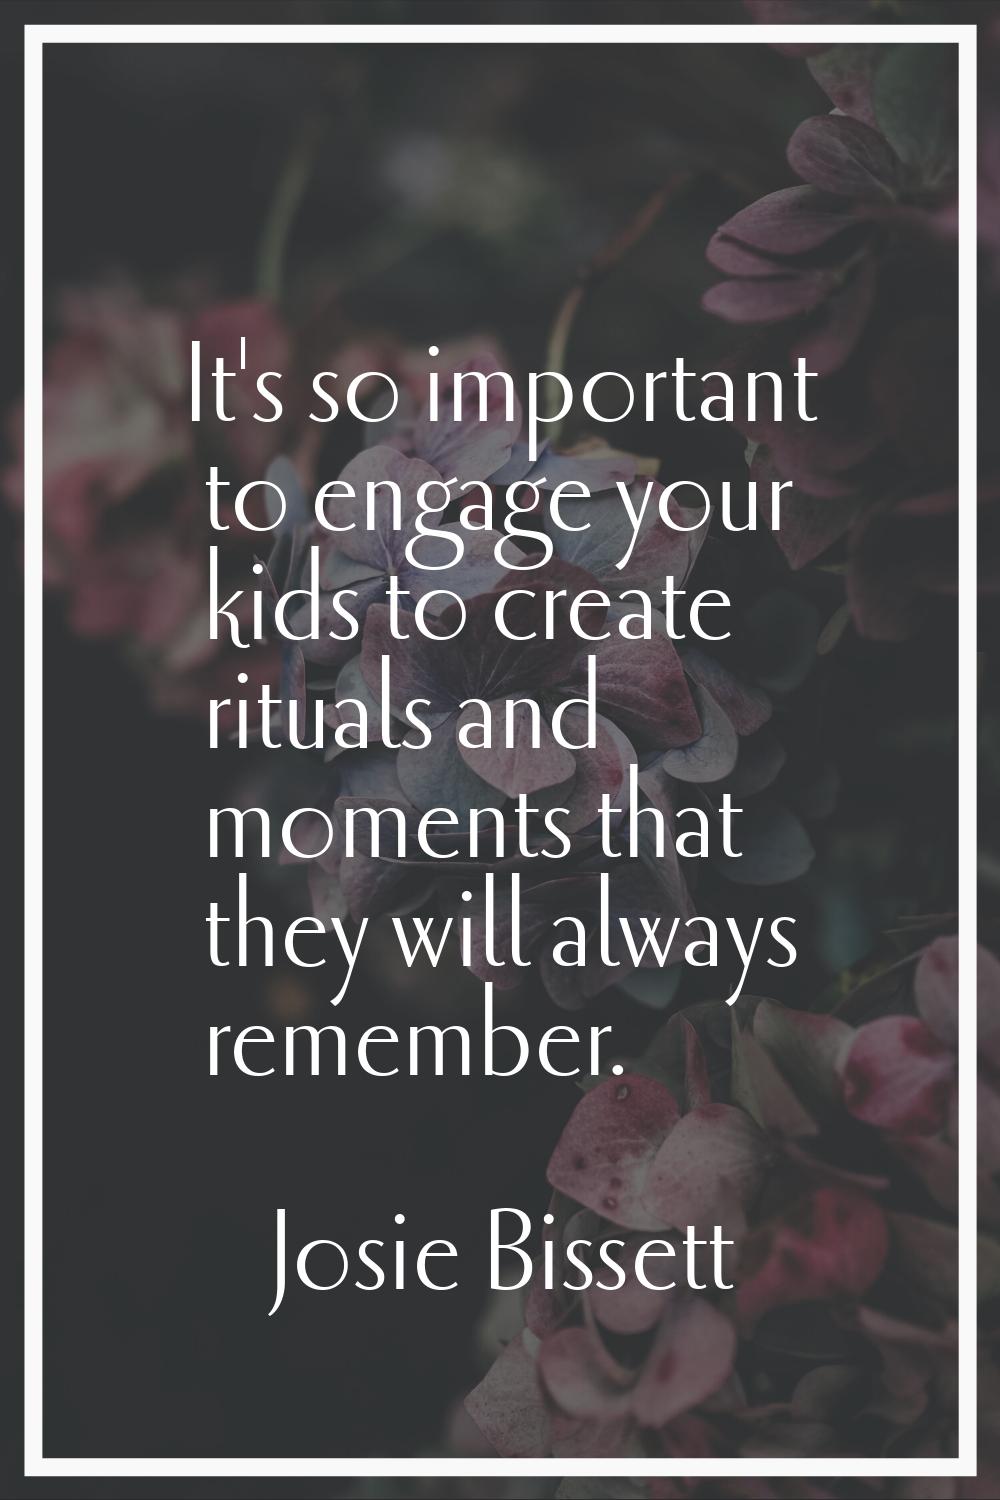 It's so important to engage your kids to create rituals and moments that they will always remember.